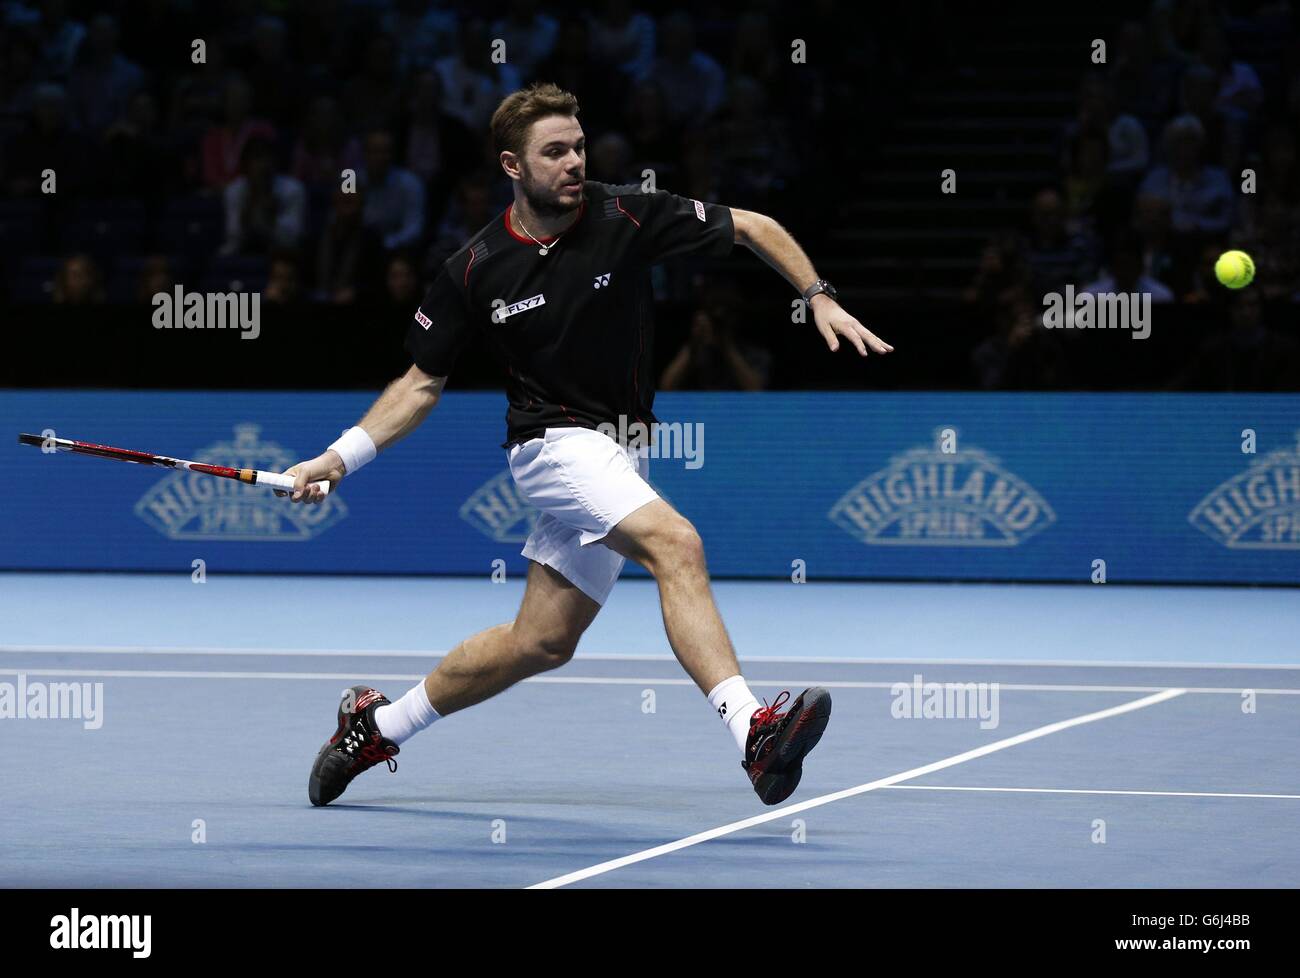 Stanislas Wawrinka competes against David Ferrer during day five of the Barclays ATP World Tour Finals at the O2 Arena, London. Stock Photo